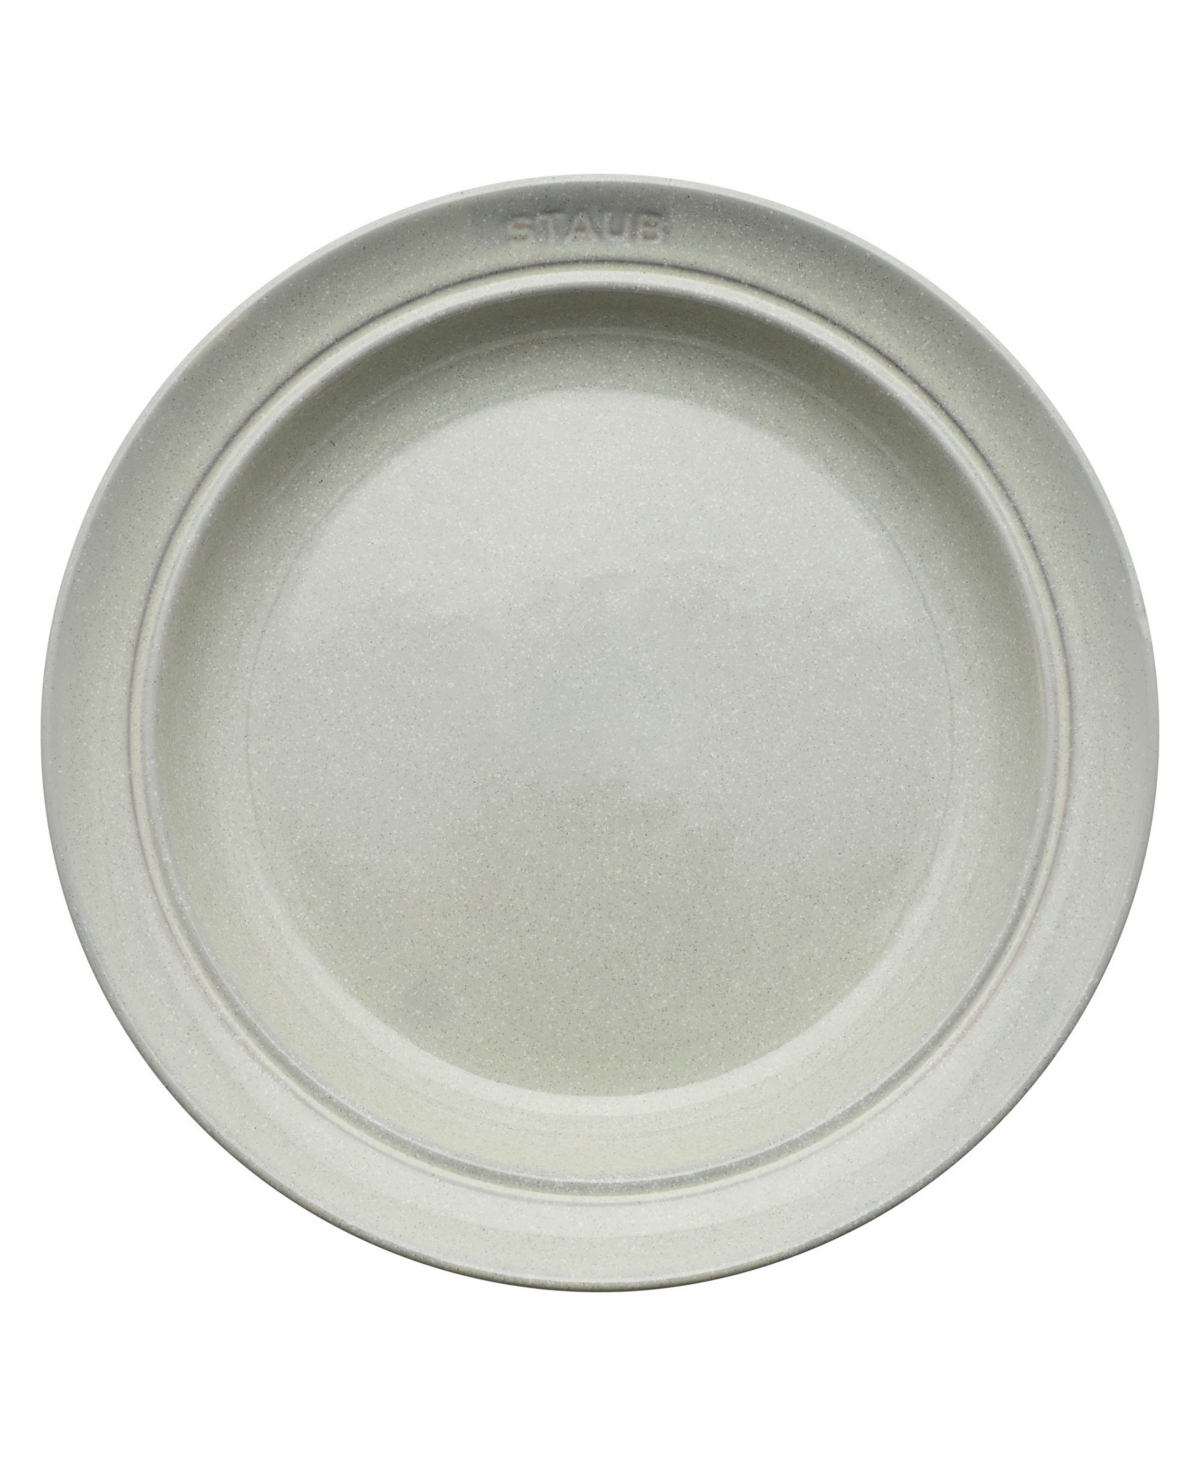 4 Piece 9.5" Soup and Pasta Bowl Set, Service for 4 - White